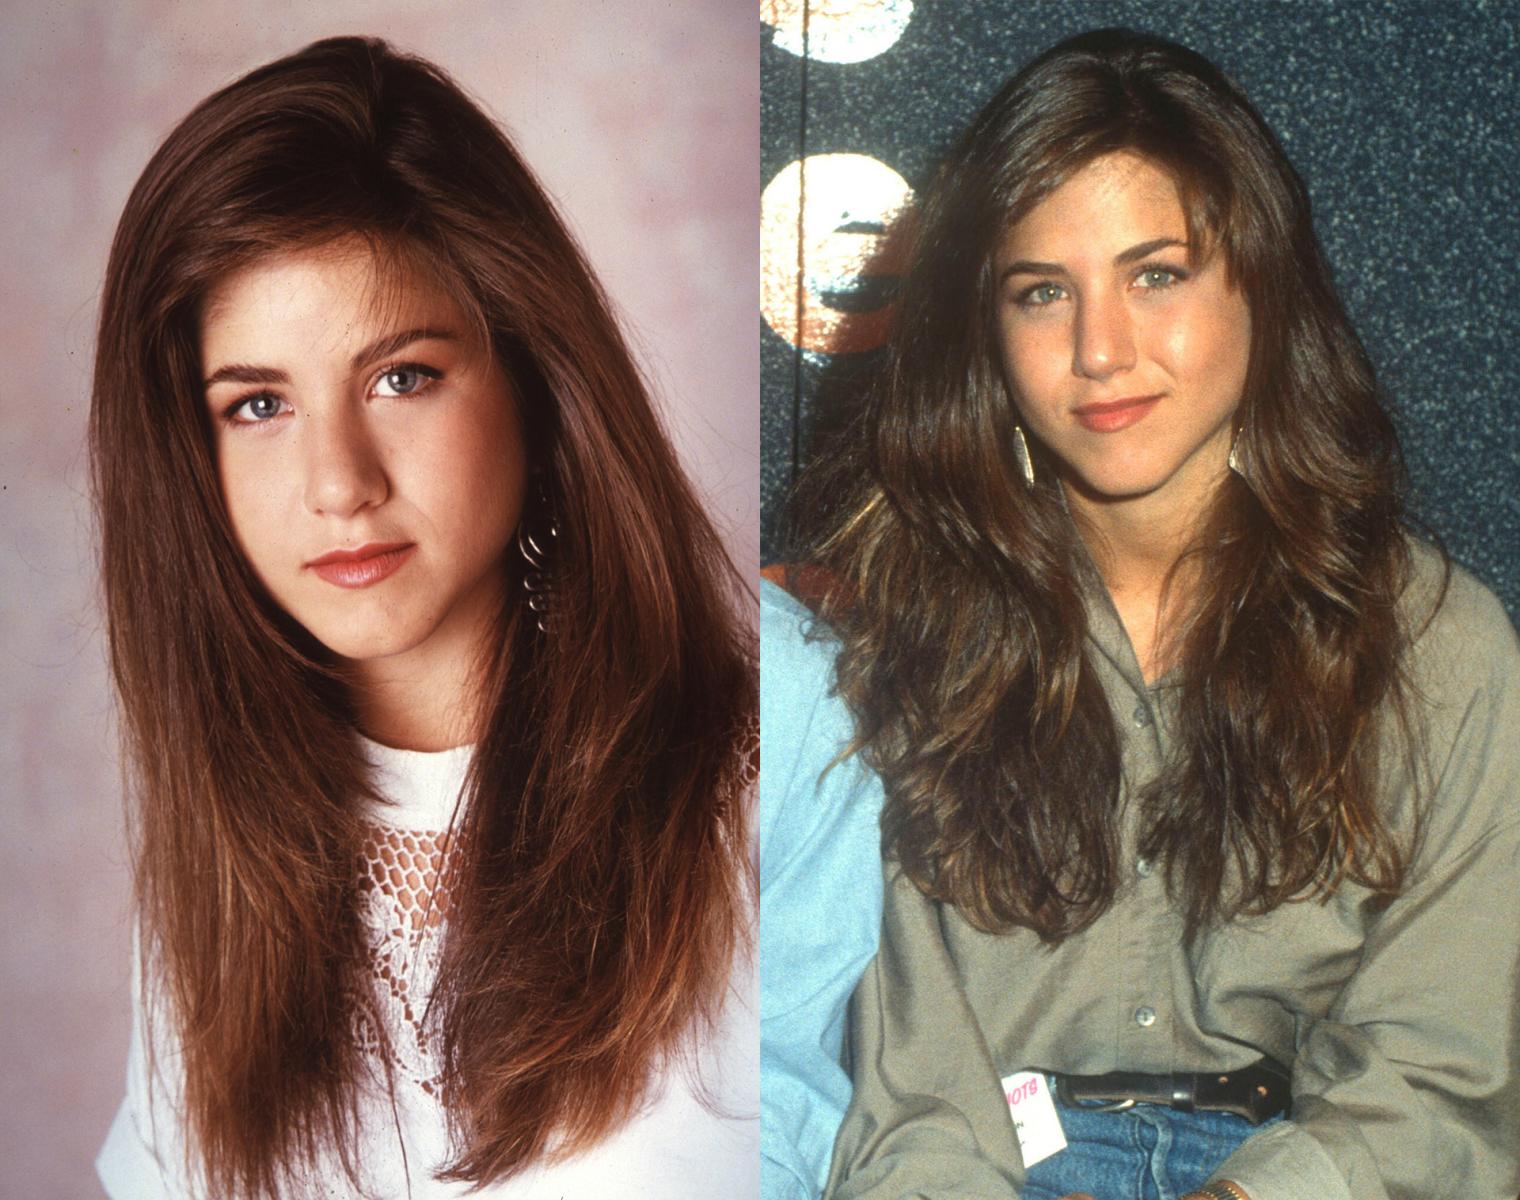 From 'Rachel' Hair to Red Carpet Glam: A Look at Aniston's Style Evolution - image 1